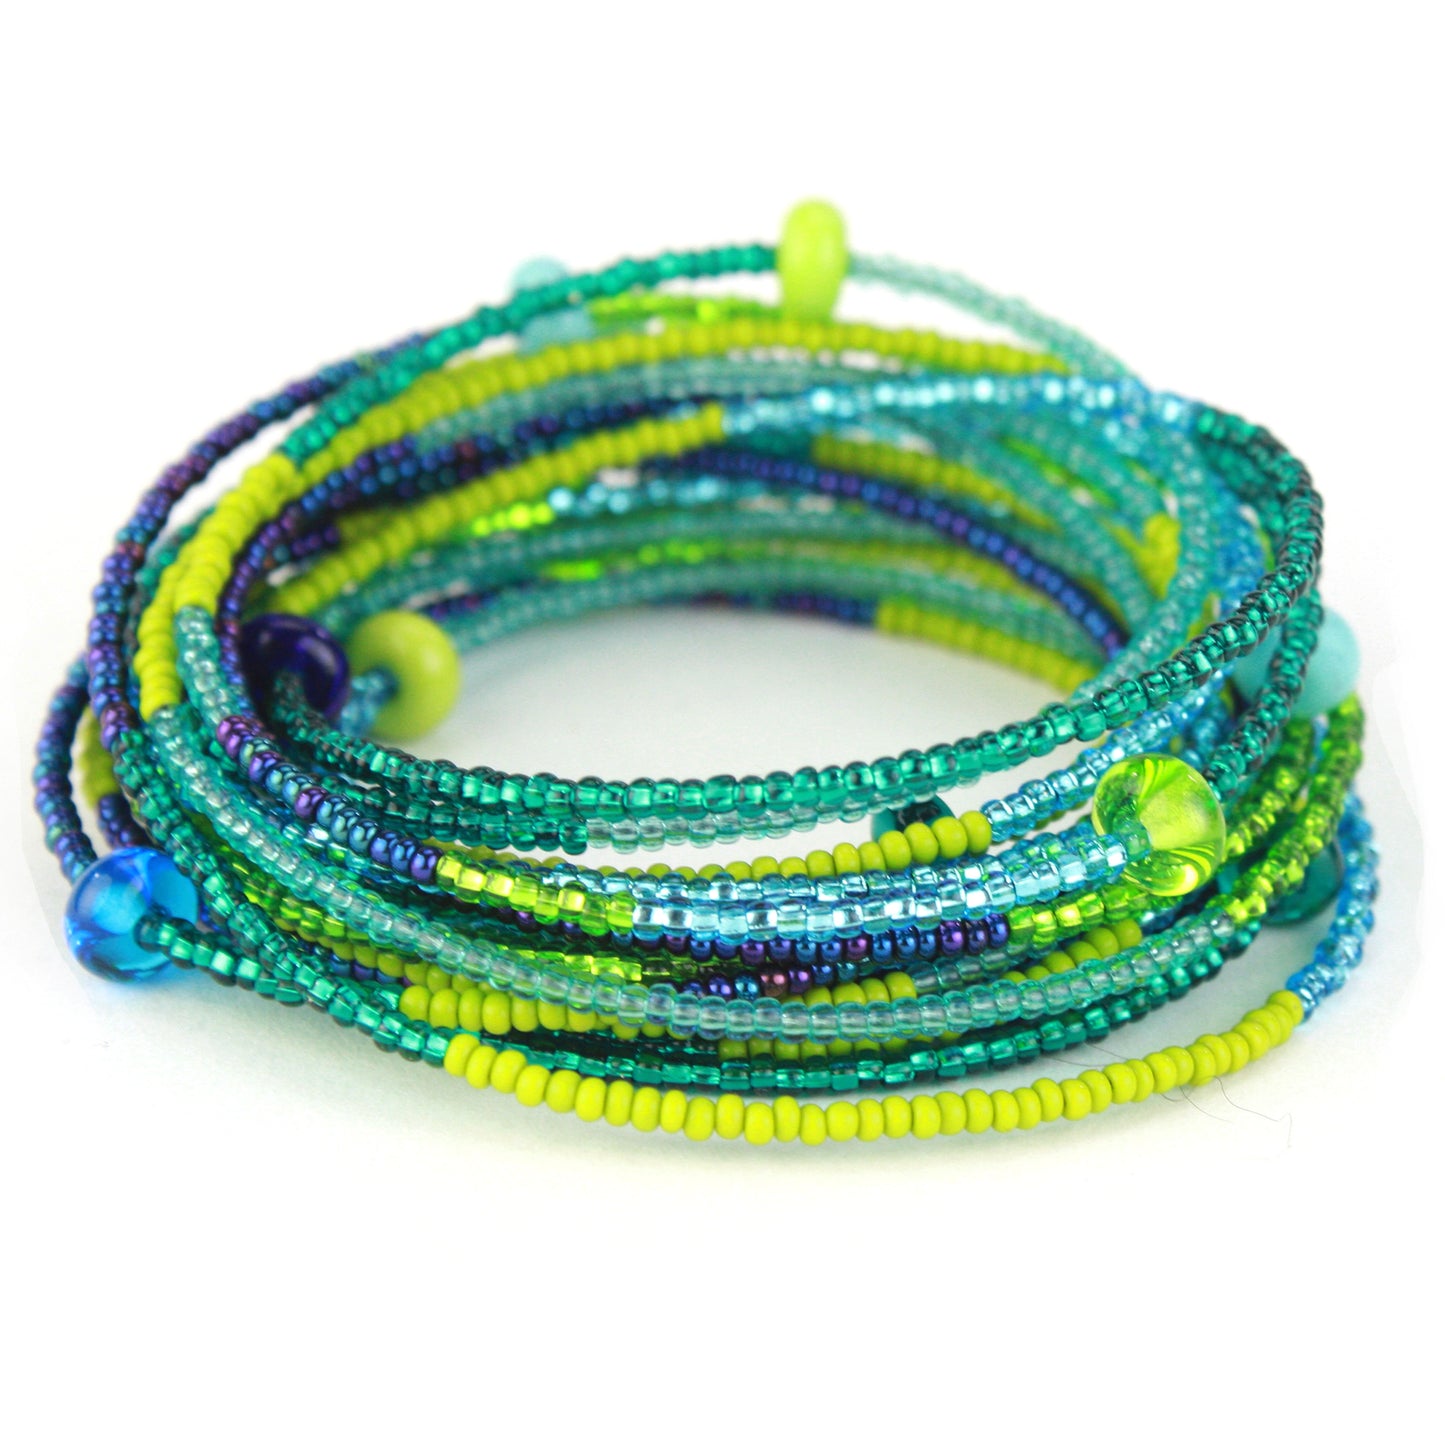 12 foot necklace - Blues and greens